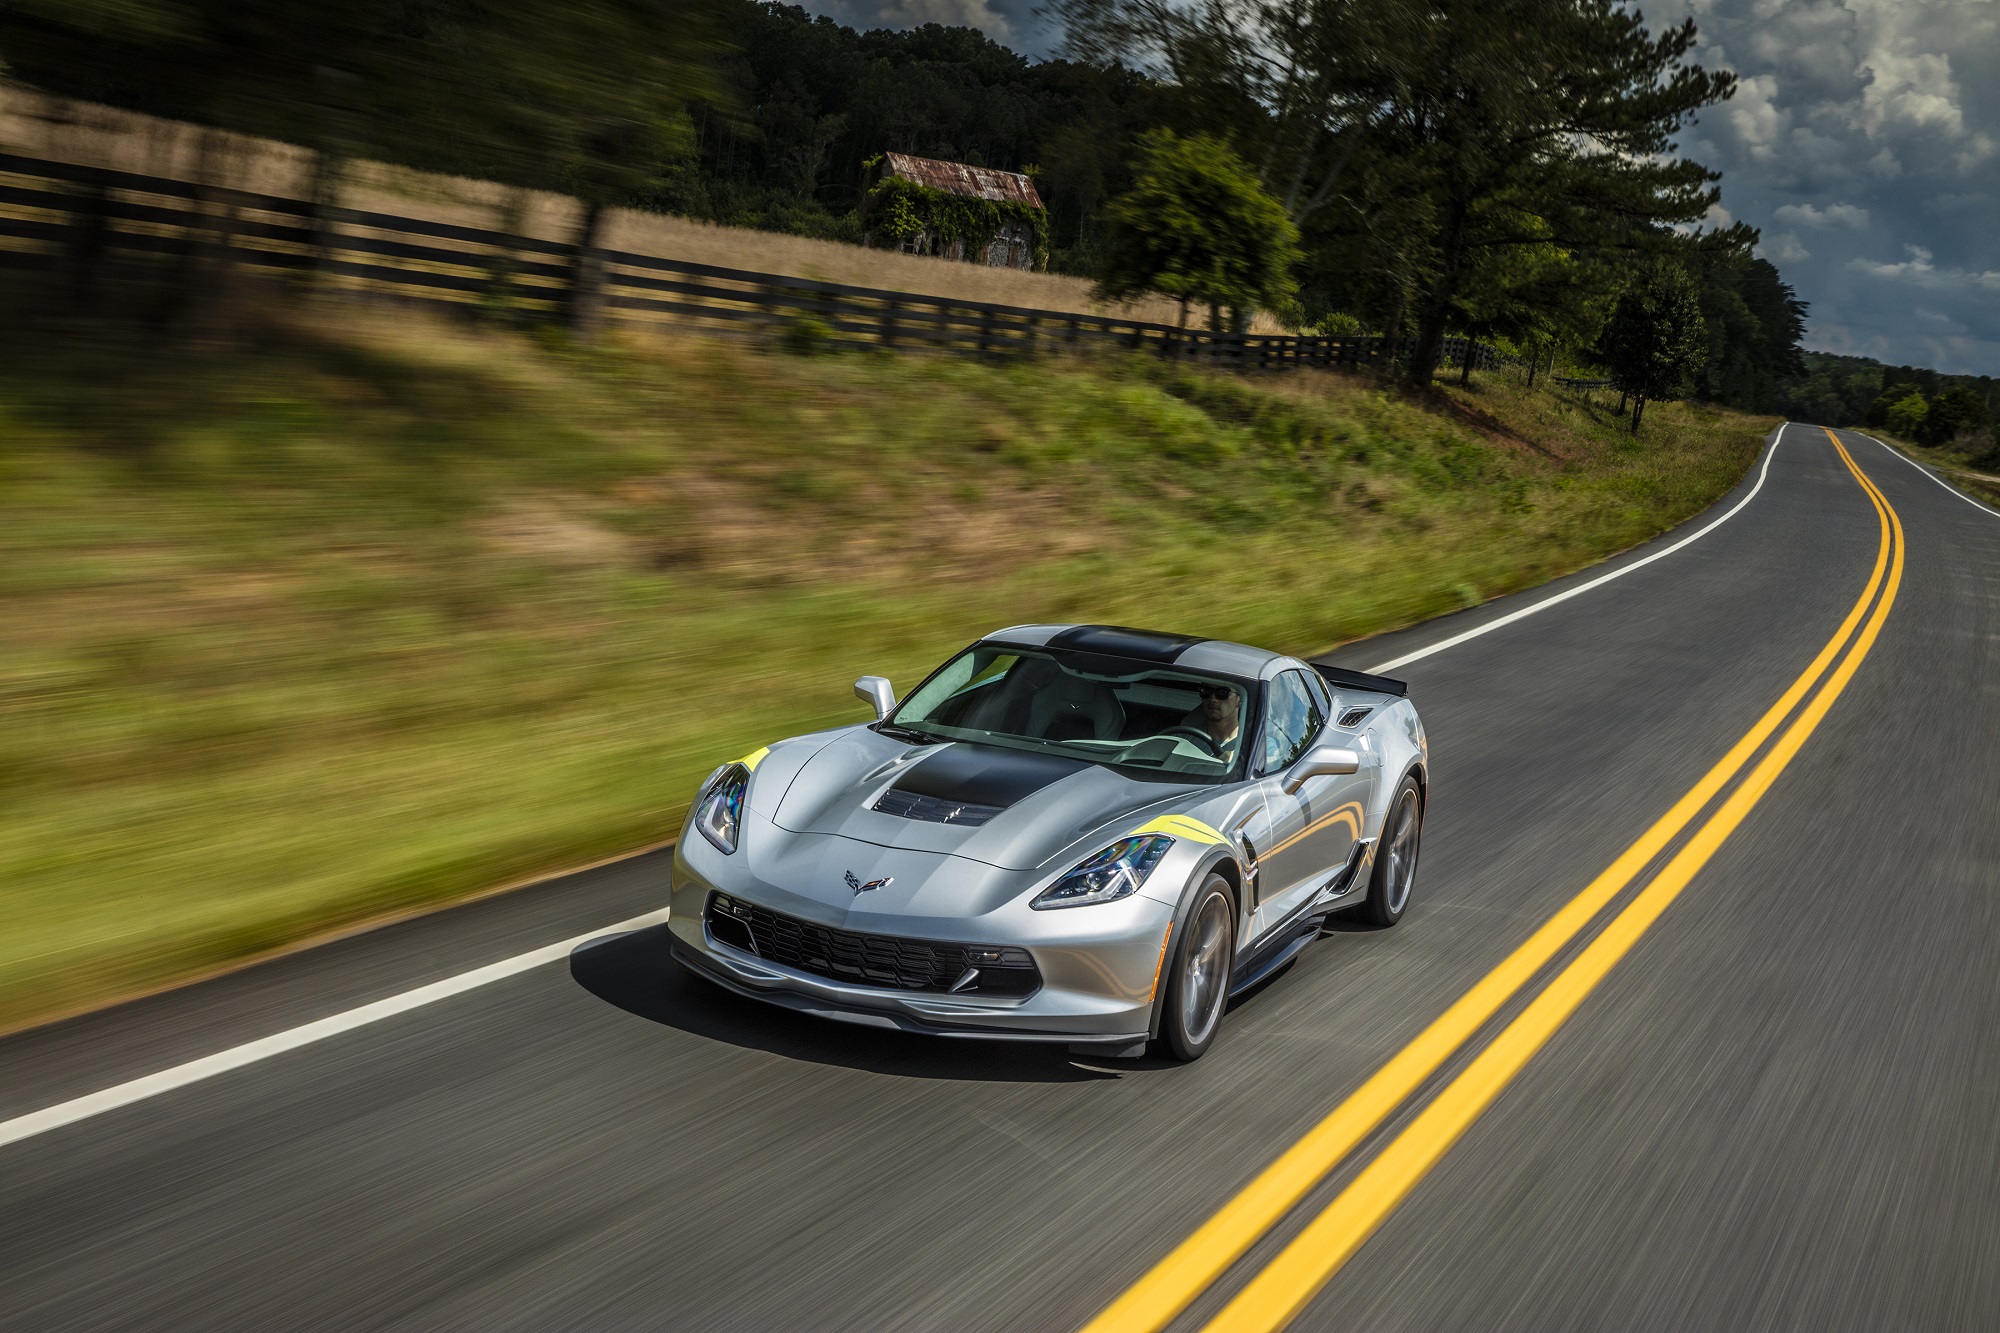 The C7 Corvette, like the C7 Z06, is a serious used car performance bargain.